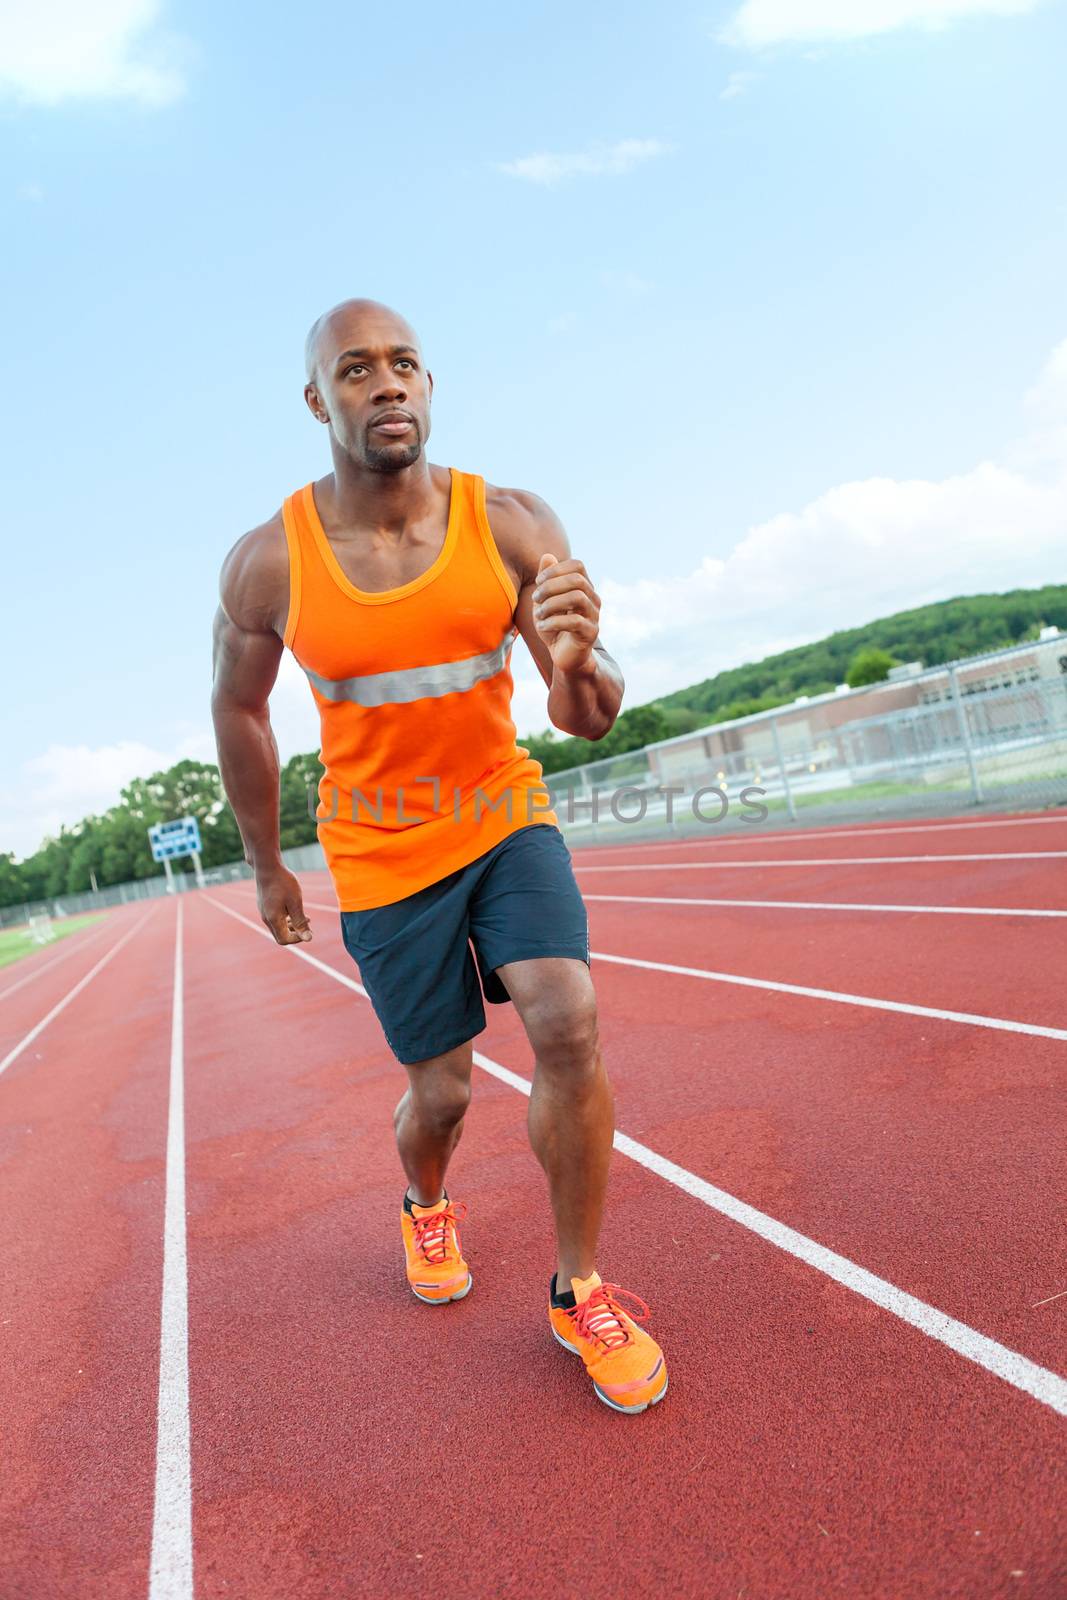 African American man in his 30s running at a sports track outdoors.